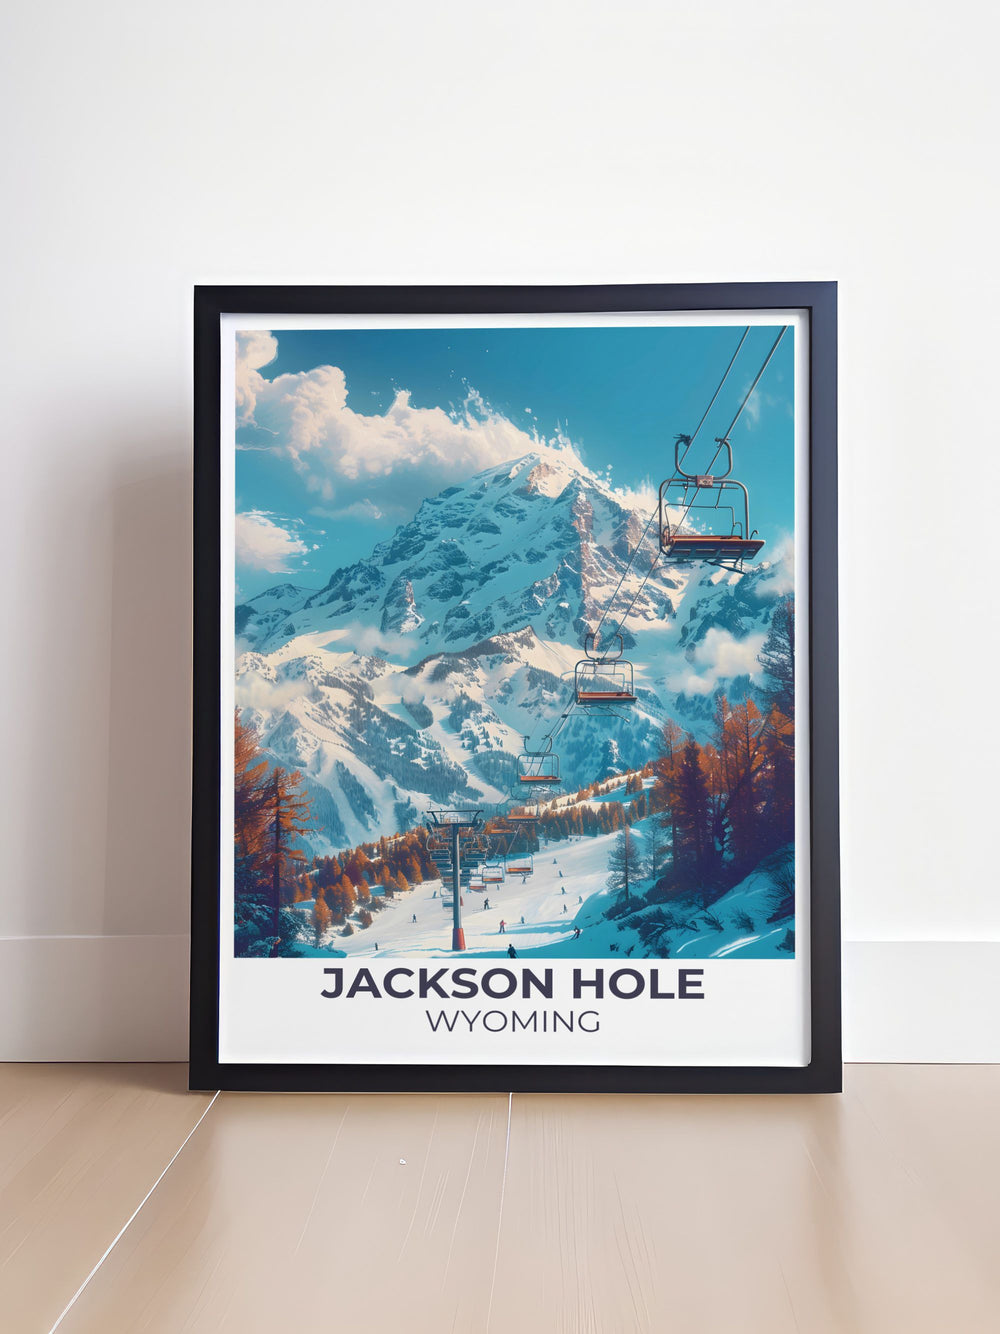 Framed print of Rendezvous Mountain capturing the snow covered peaks and skier silhouettes perfect for ski lovers